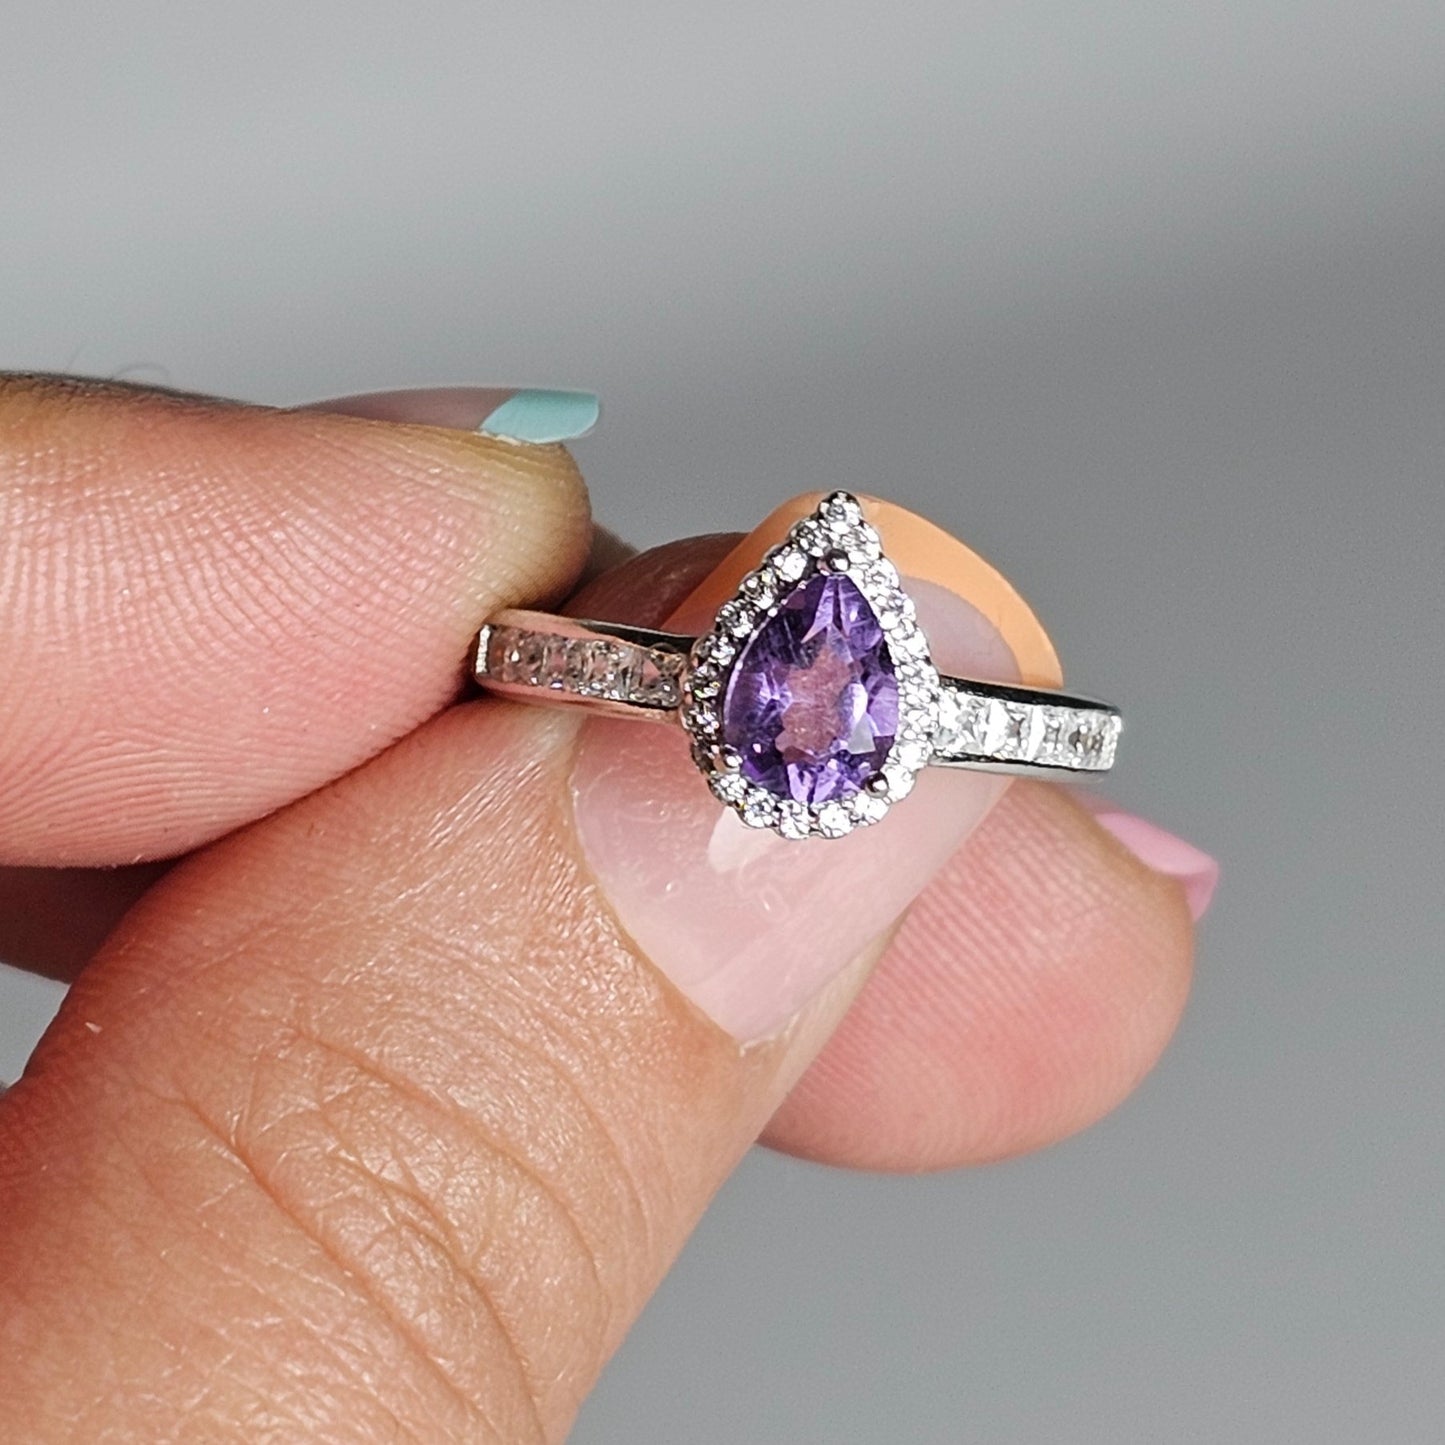 This adjustable ring is crafted from sterling silver and features a gorgeous pear shaped Amethyst centre stone with a Zircon accented crown and shoulder ring band.